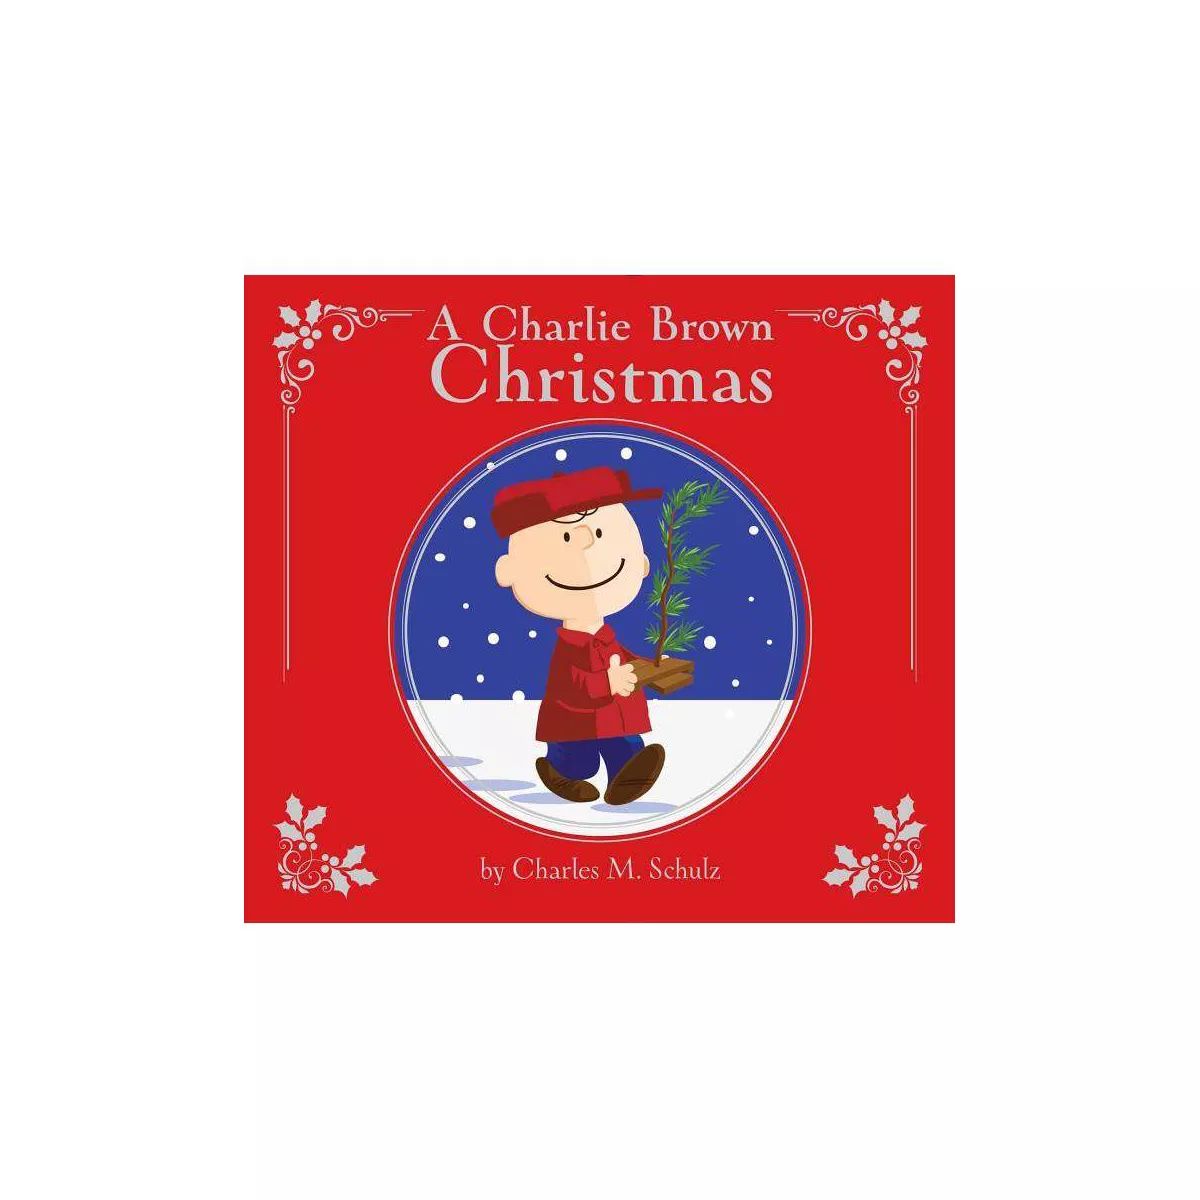 A Charlie Brown Christmas: Deluxe Edition - By Charles M. Schulz ( Hardcover ) | Target